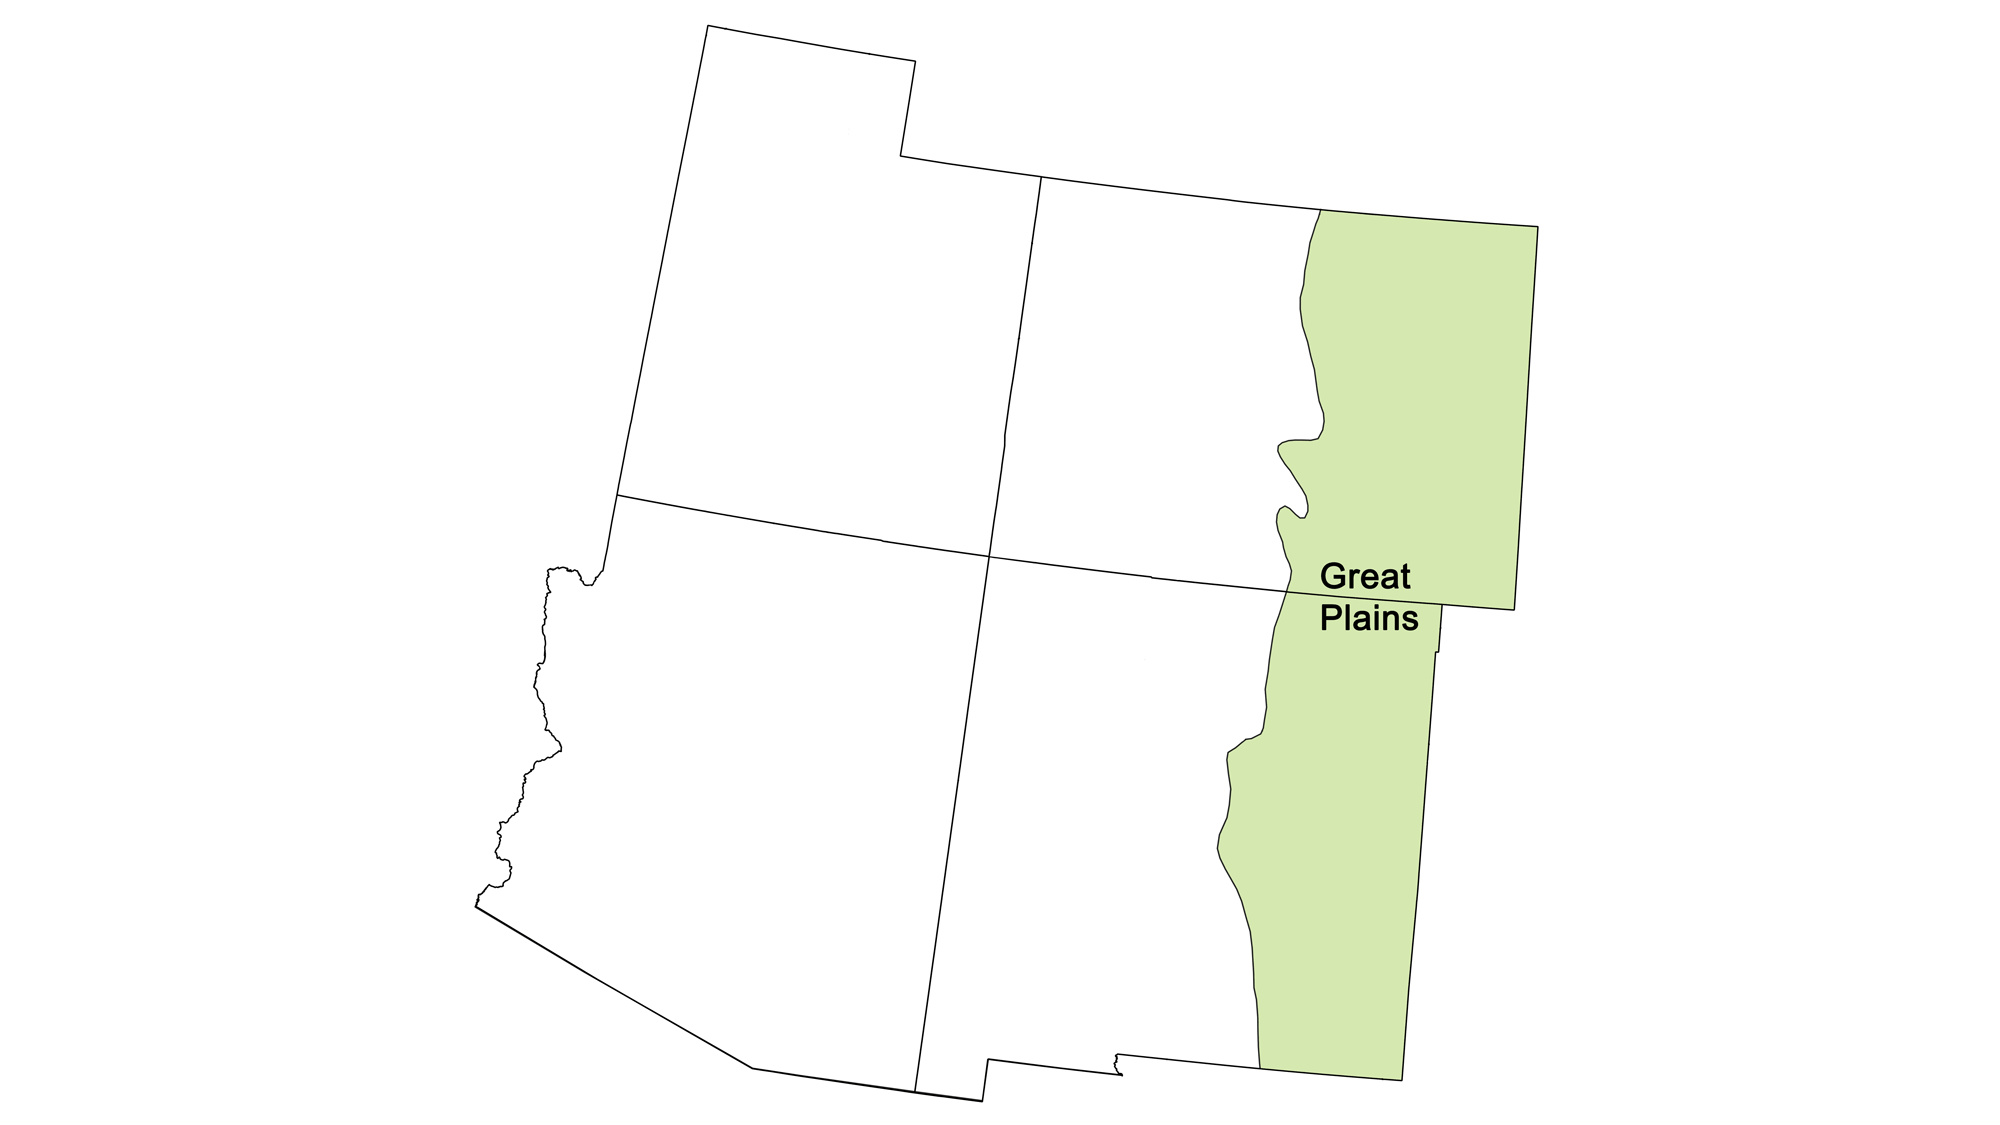 Simple map showing the area of the Great Plains province of the southwestern United States.